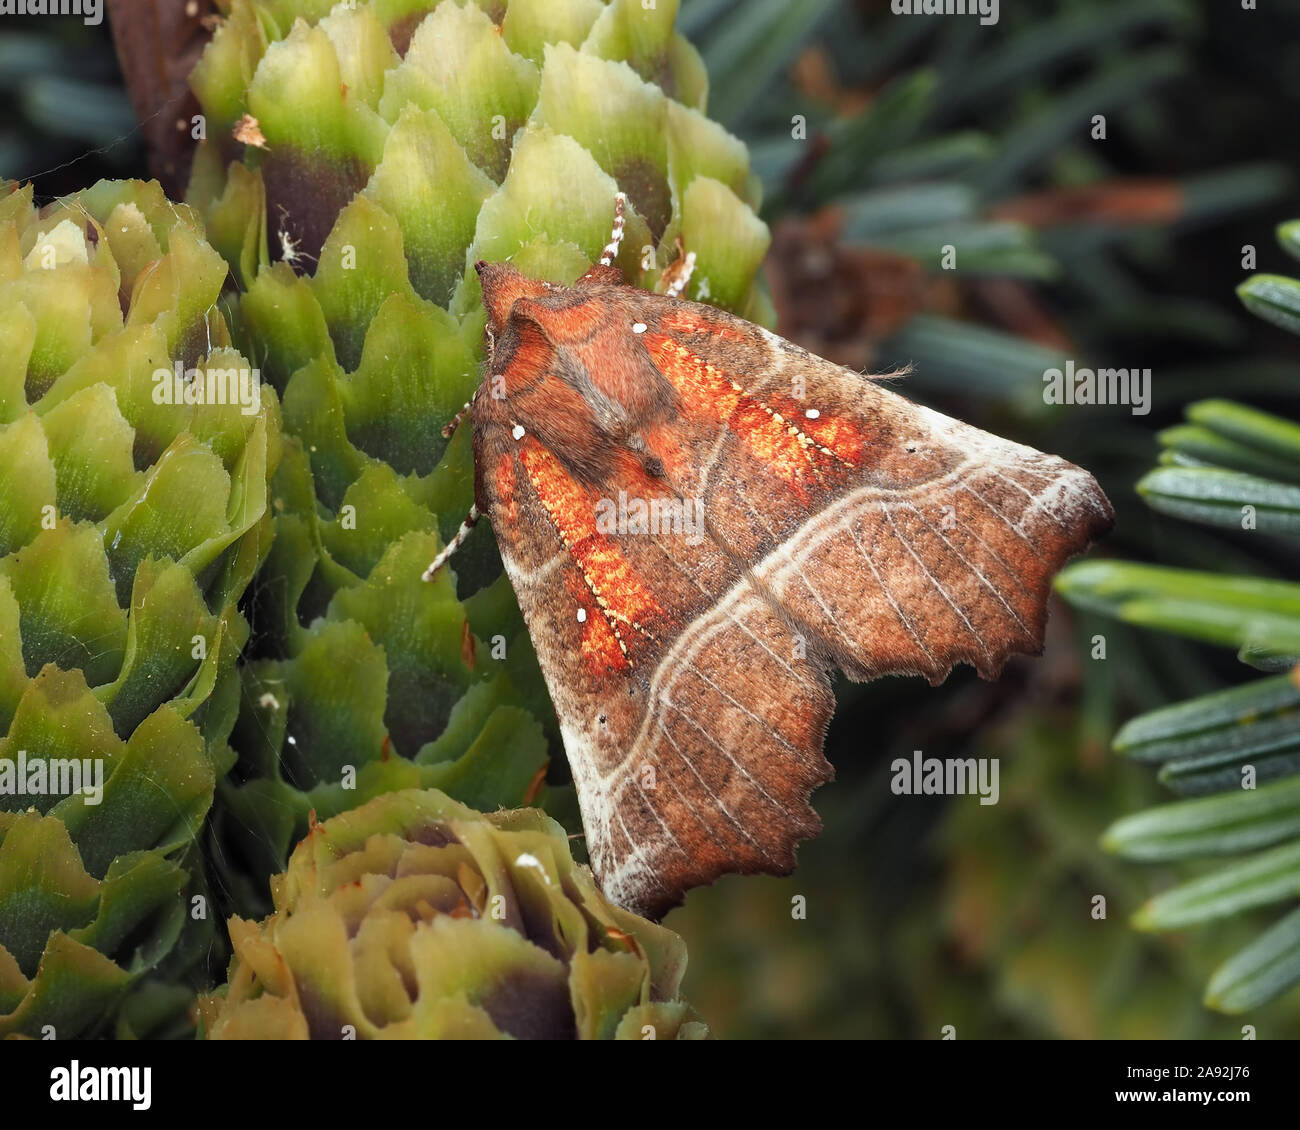 The Herald moth (Scoliopteryx libatrix) at rest on conifer tree cone. Tipperary, Ireland Stock Photo